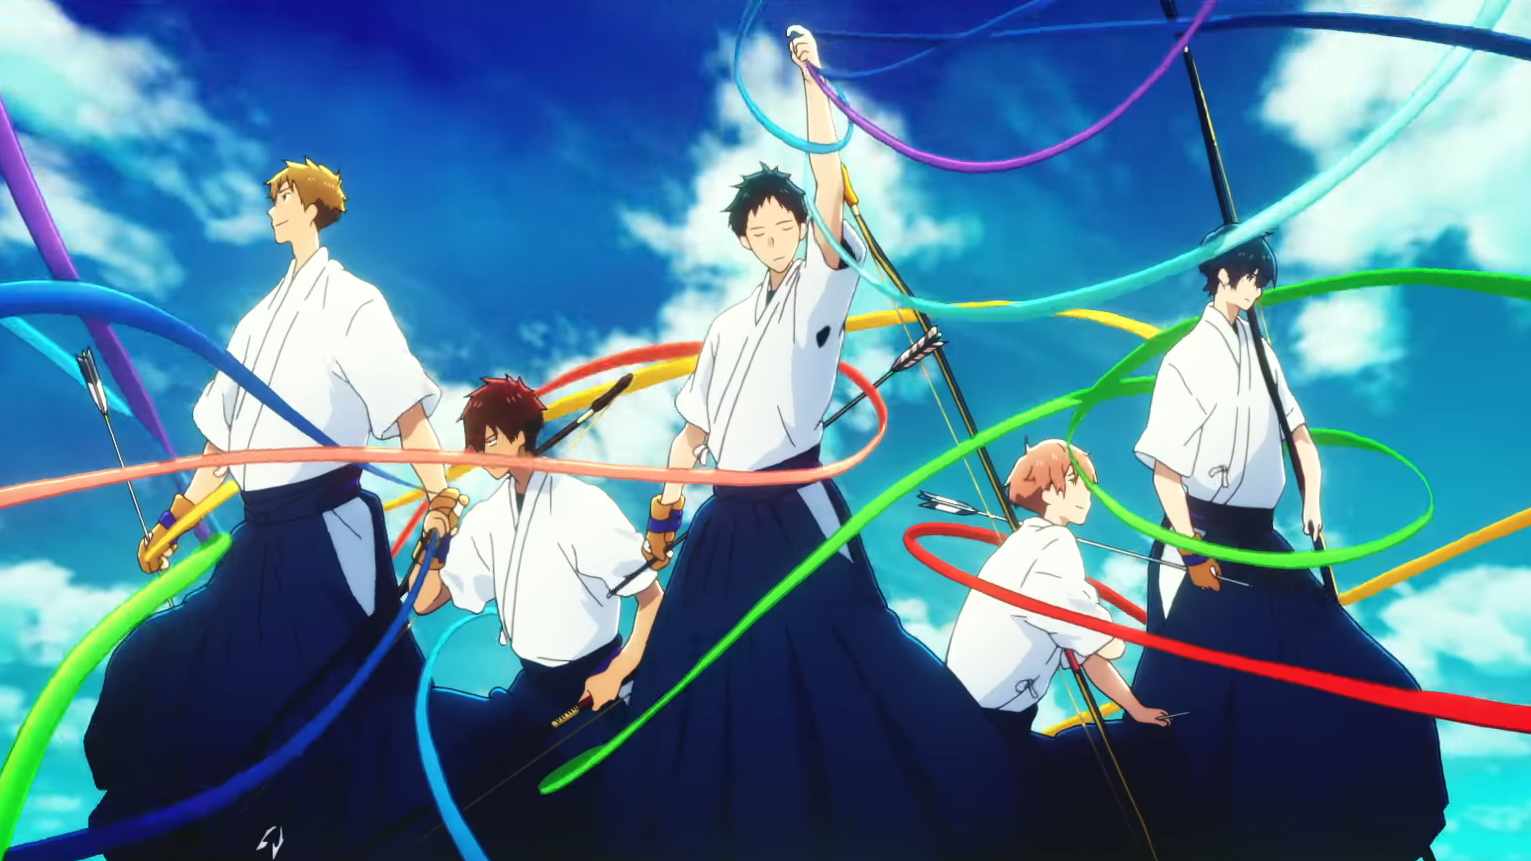 The Linking Shot Reveals Opening in Creditless Version